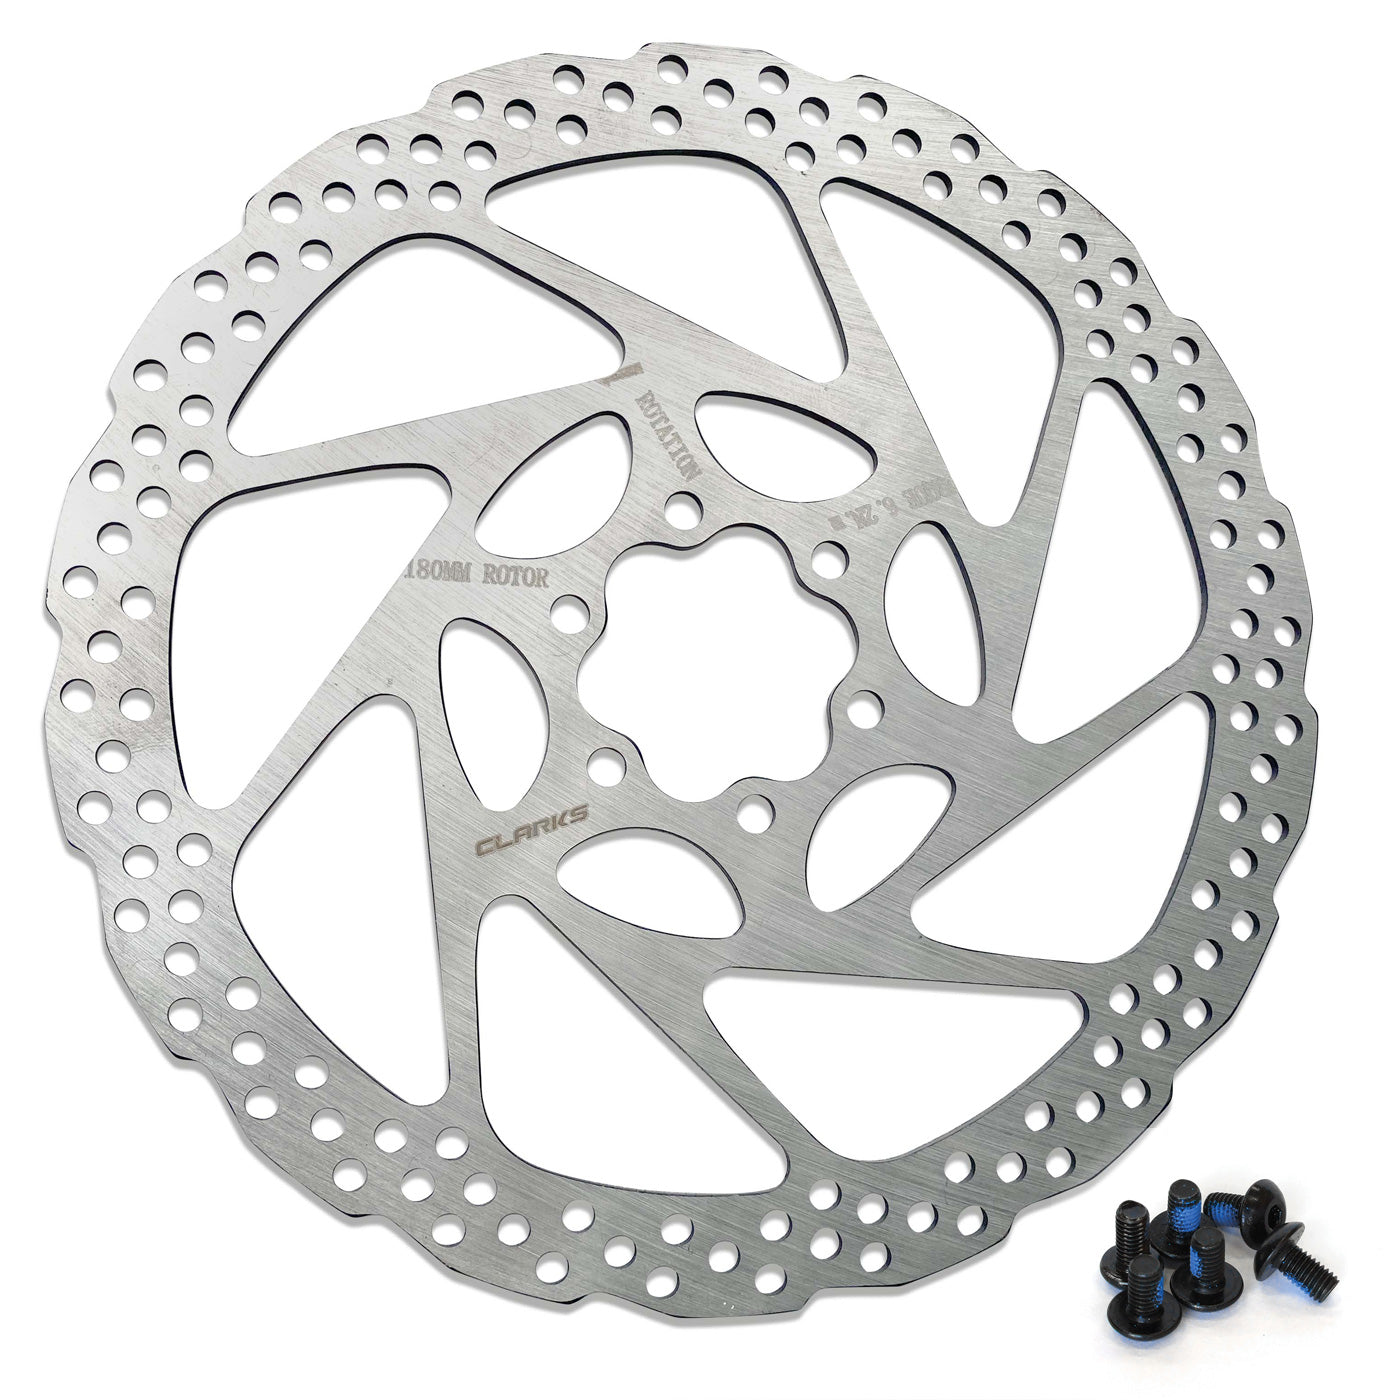 View EBike Specific Single Piece Rotor 180mm information